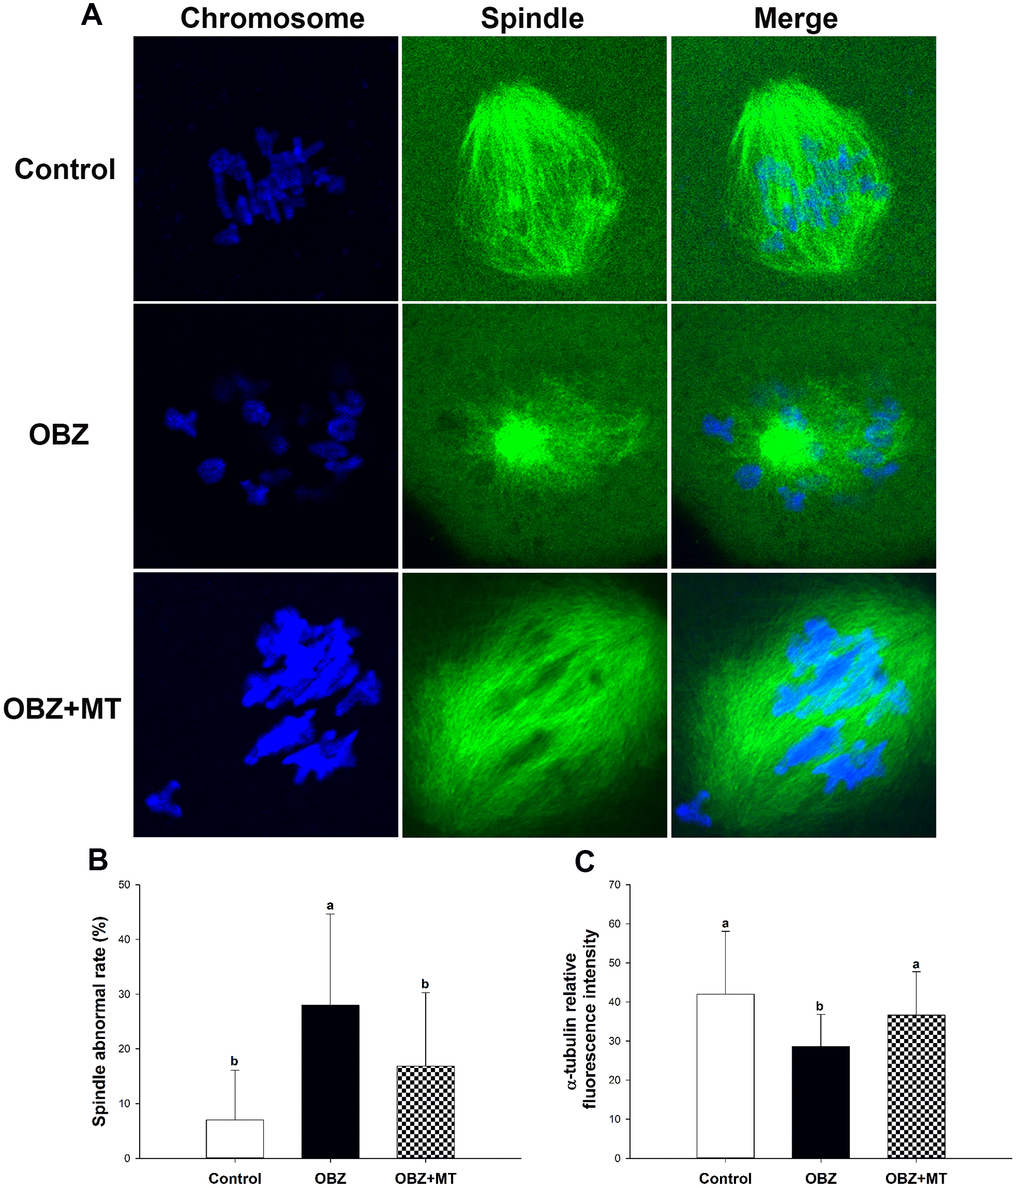 Effects of melatonin on spindle formation and chromosome alignment in OBZ-exposed mice in vivo. (A) Representative images of spindle morphologies and chromosome alignment in the control, OBZ-exposed, and melatonin+OBZ-treated oocytes. Green, α-tubulin; blue, DNA. (B) The rate of abnormal spindles observed in each treatment group. (C) Fluorescence intensity analysis of α-tubulin in the control, OBZ-exposed, and melatonin+OBZ-treated oocytes. Values indicated by different letters are significantly different (P 